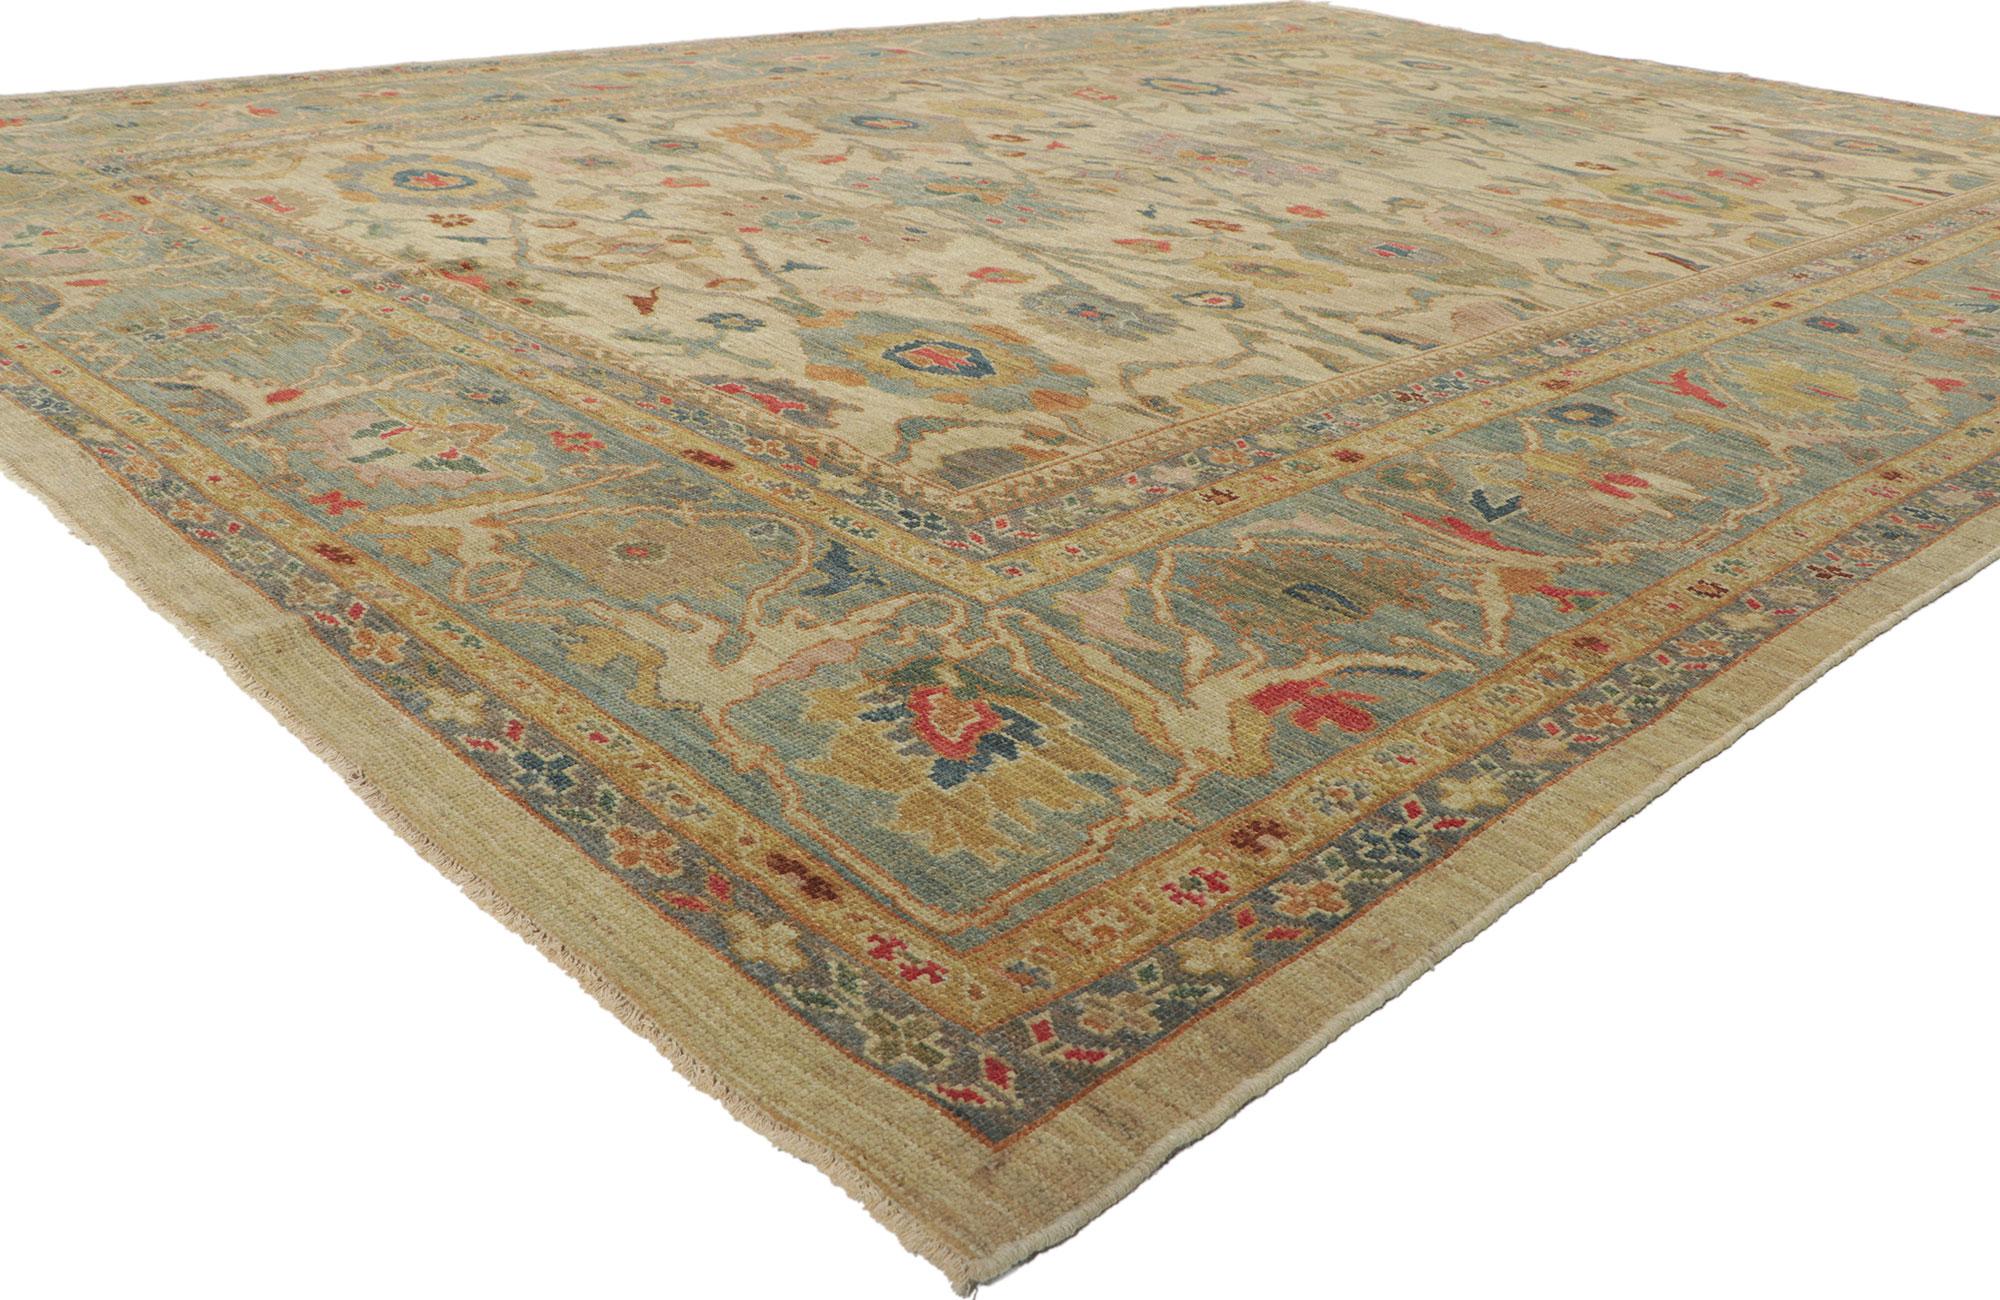 60709 Organic Modern Persian Sultanabad Rug, 10'00 x 13'10. Incorporating elements of both Organic Modern style and Biophilic Design, this hand-knotted wool Persian Sultanabad rug stands as a captivating embodiment of woven beauty. Its versatility,